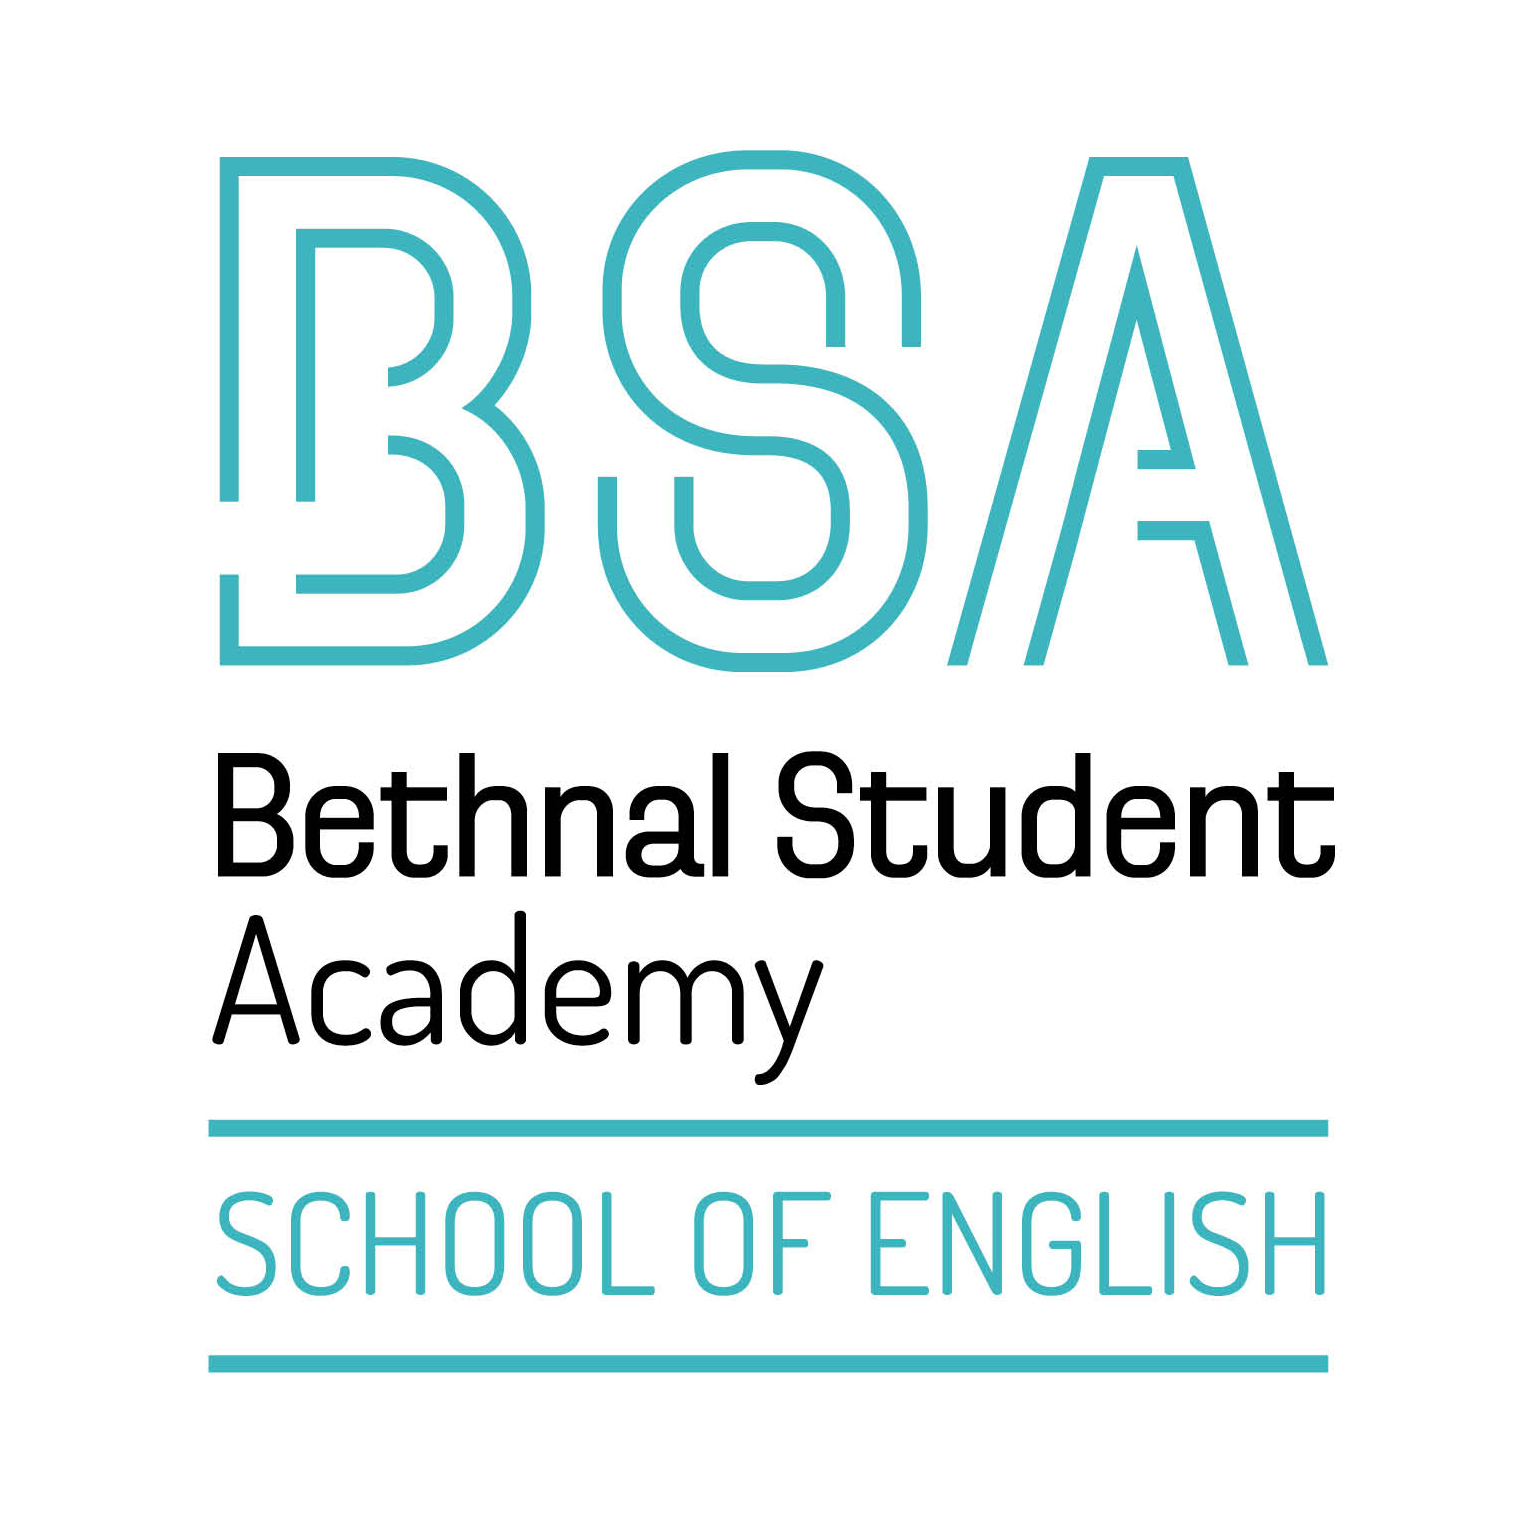 Bethnal Student Academy